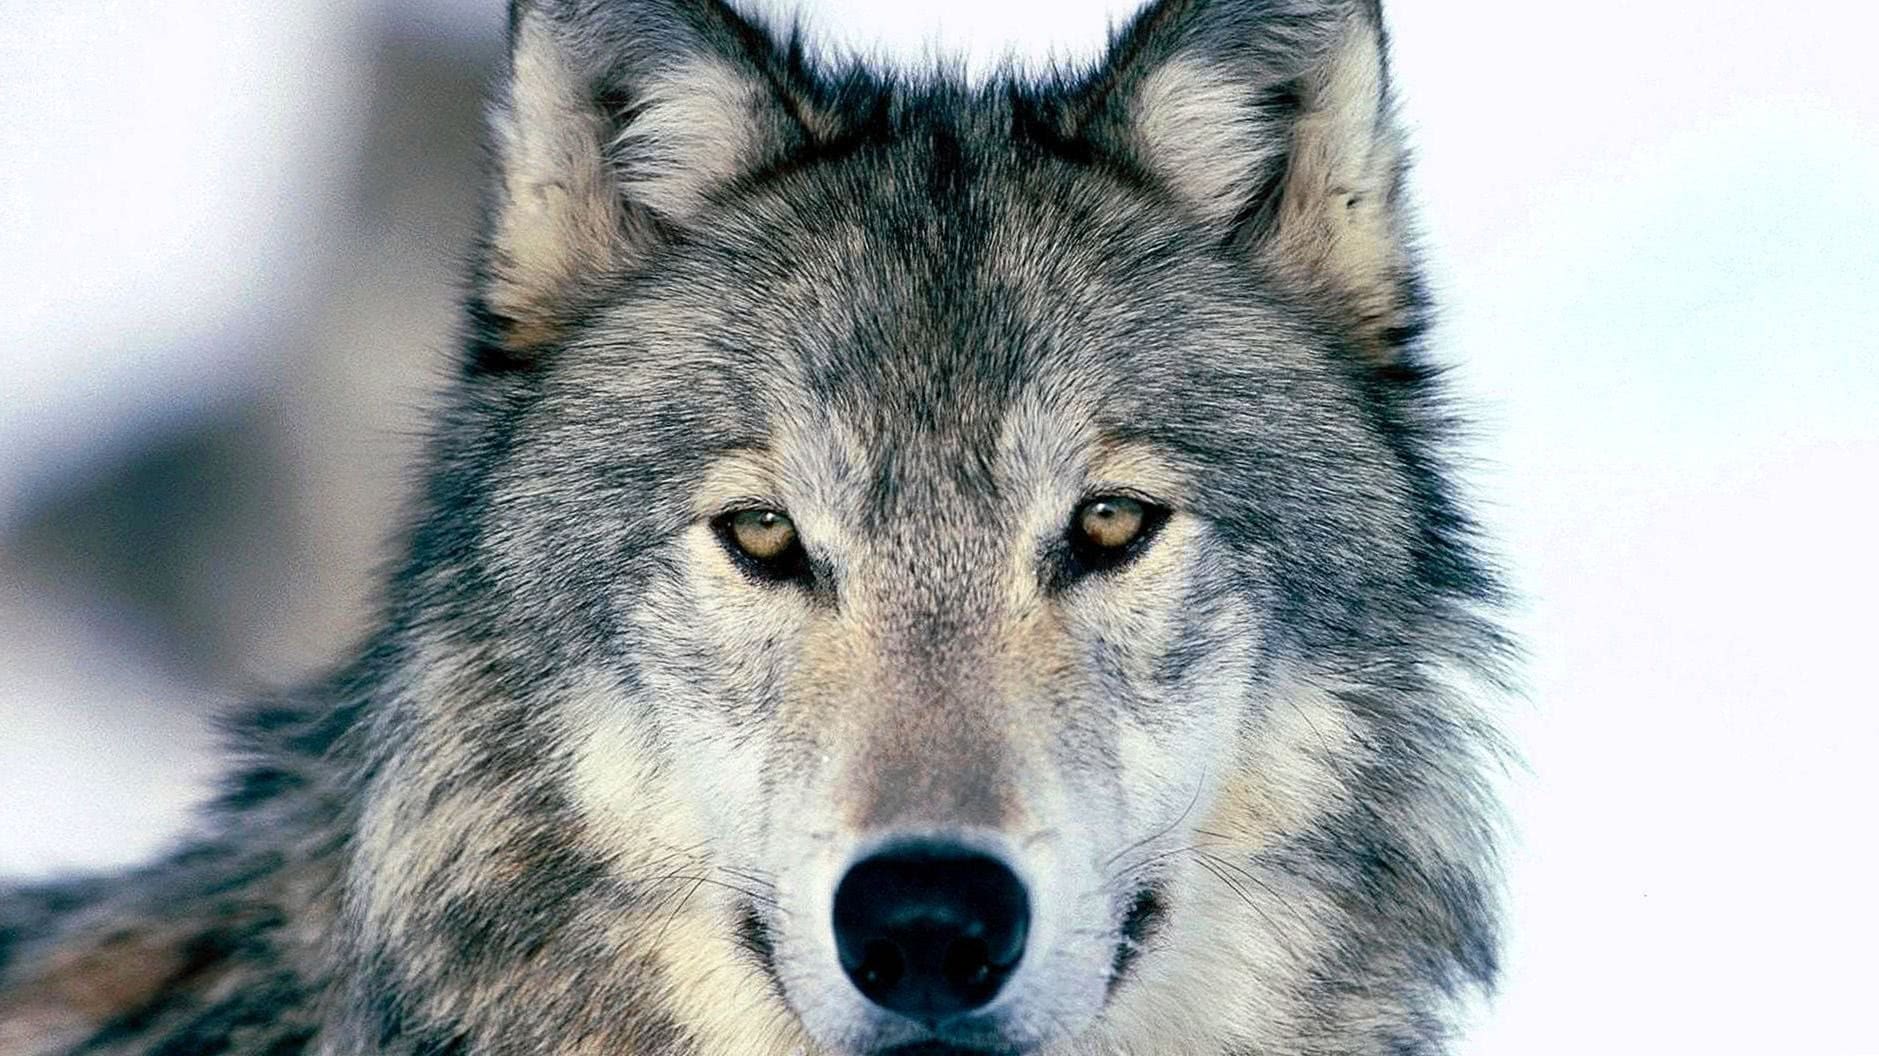 HD Wallpapers 1080p Wolves